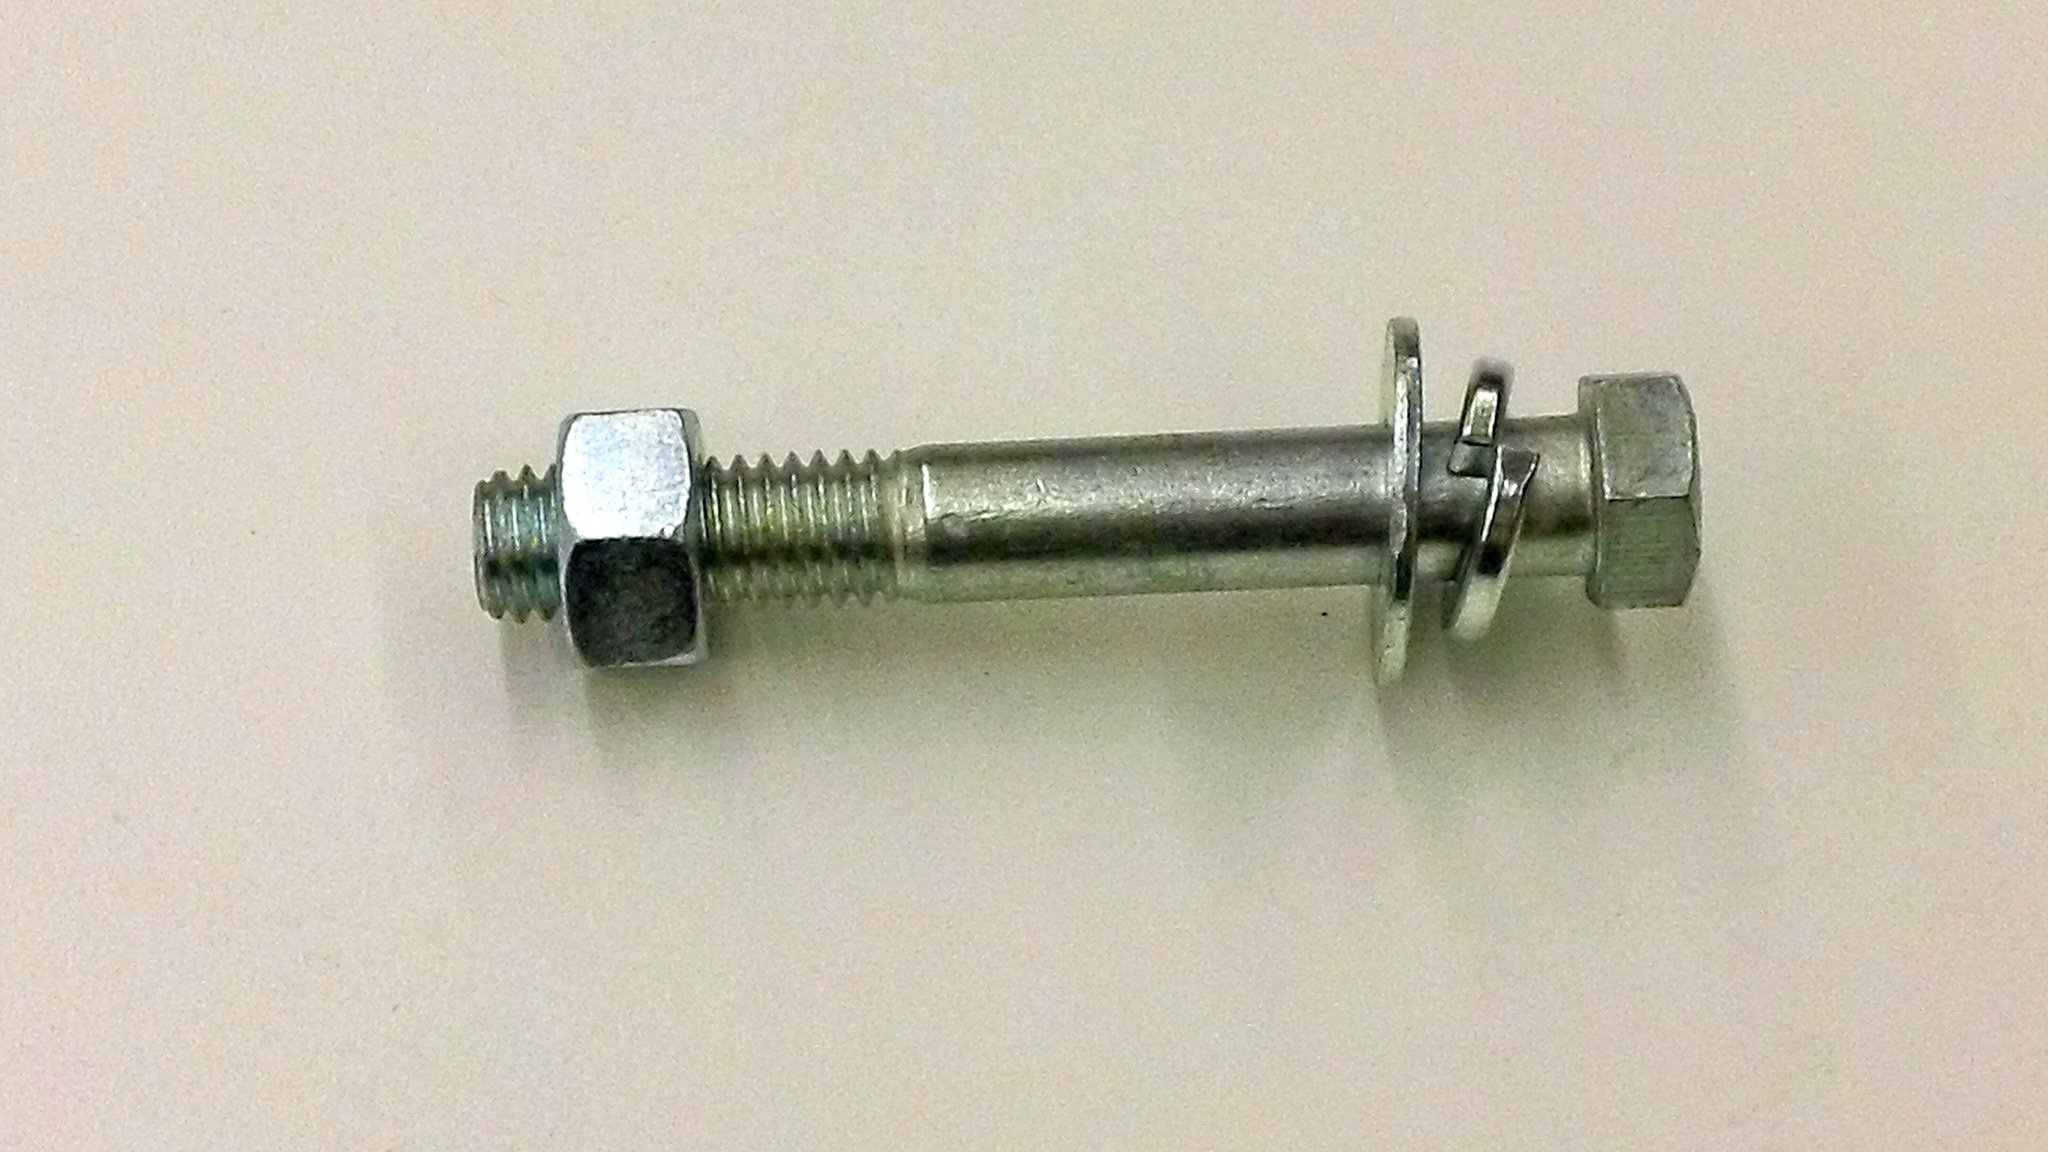 Bolt, Plain washer and Spring lock washer